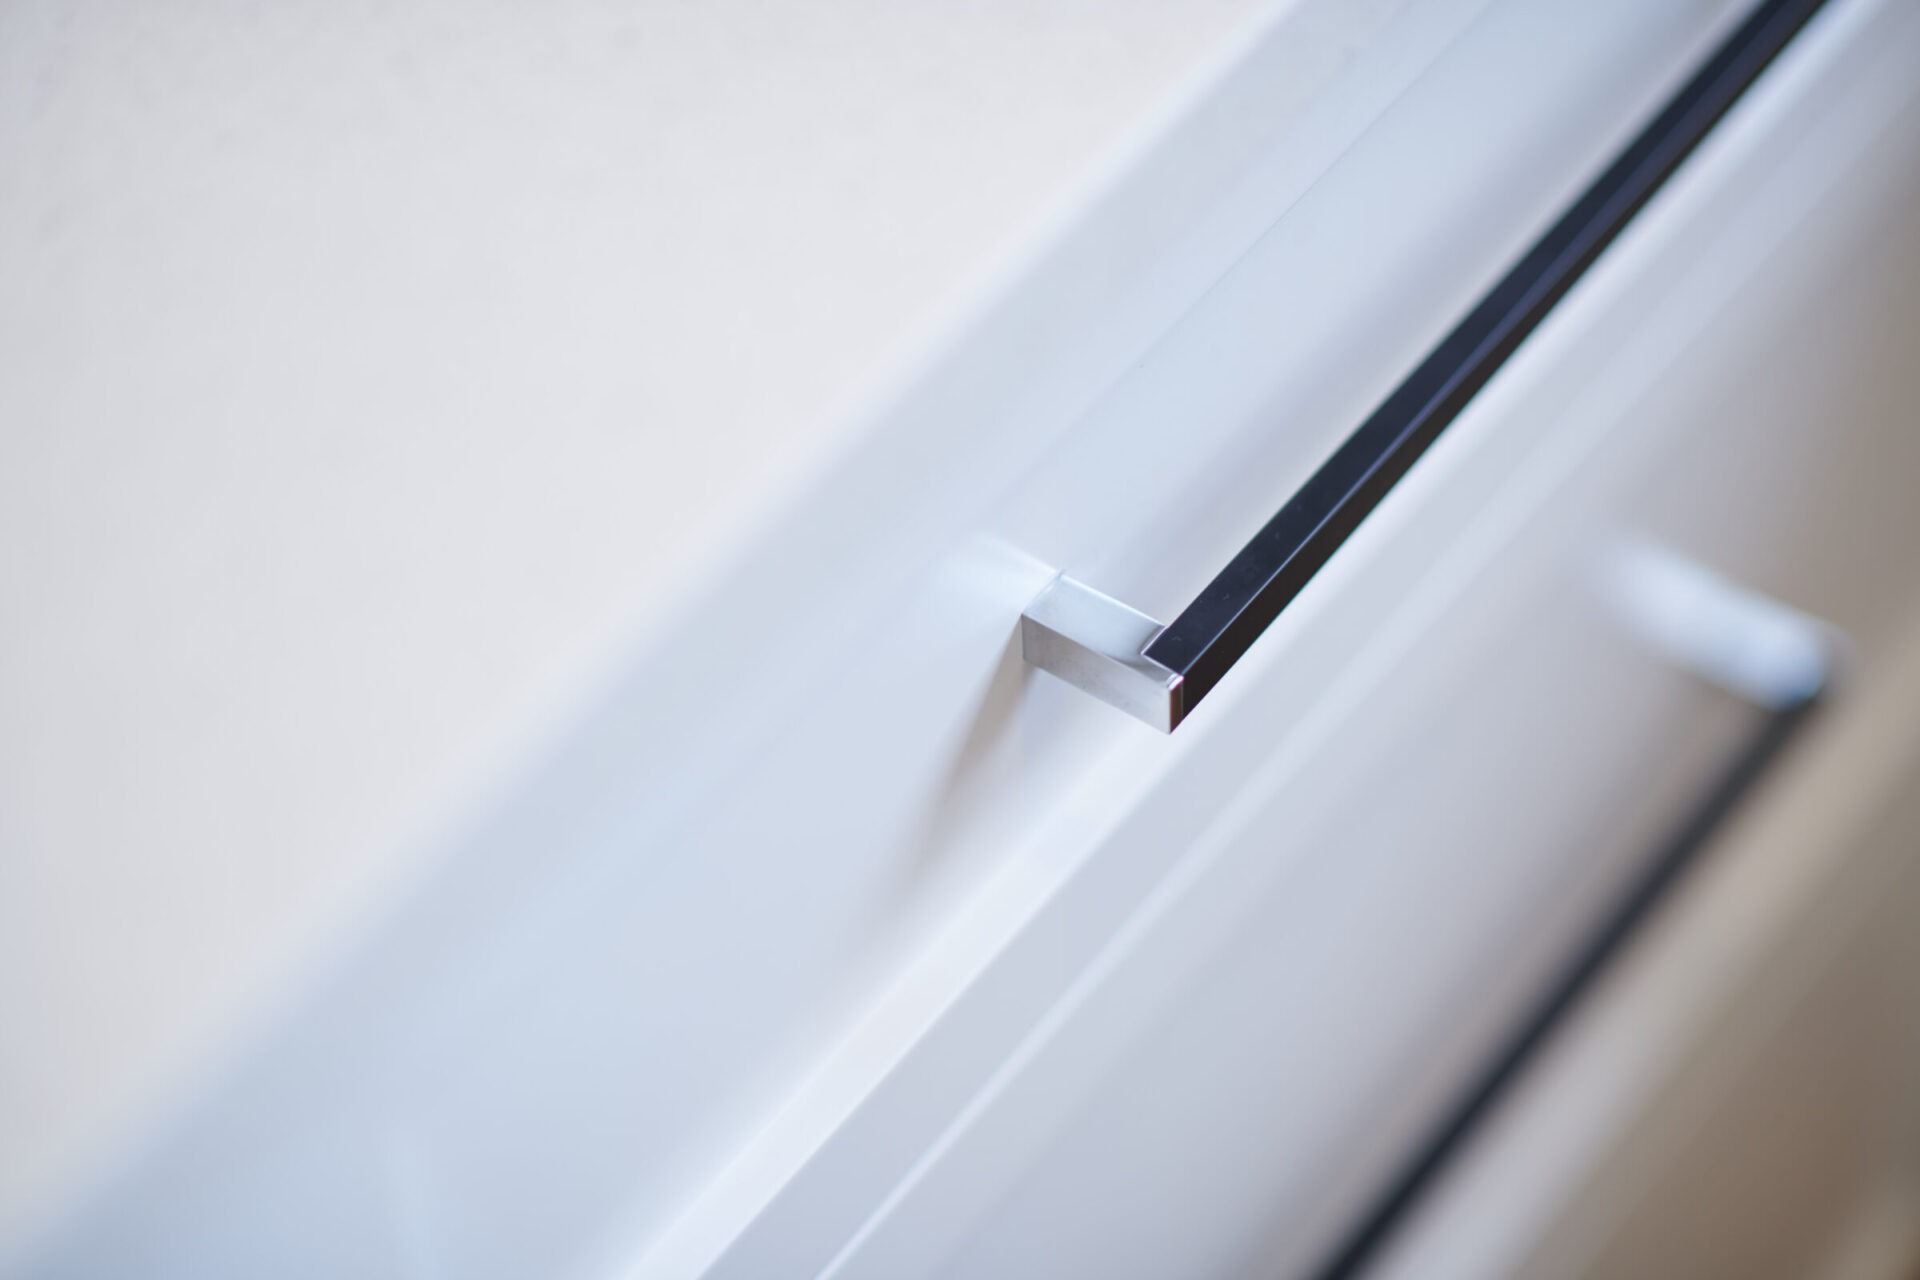 This image shows a close-up of a modern, sleek cabinet handle attached to a white cupboard, with a blurred background emphasizing the handle's clean lines.